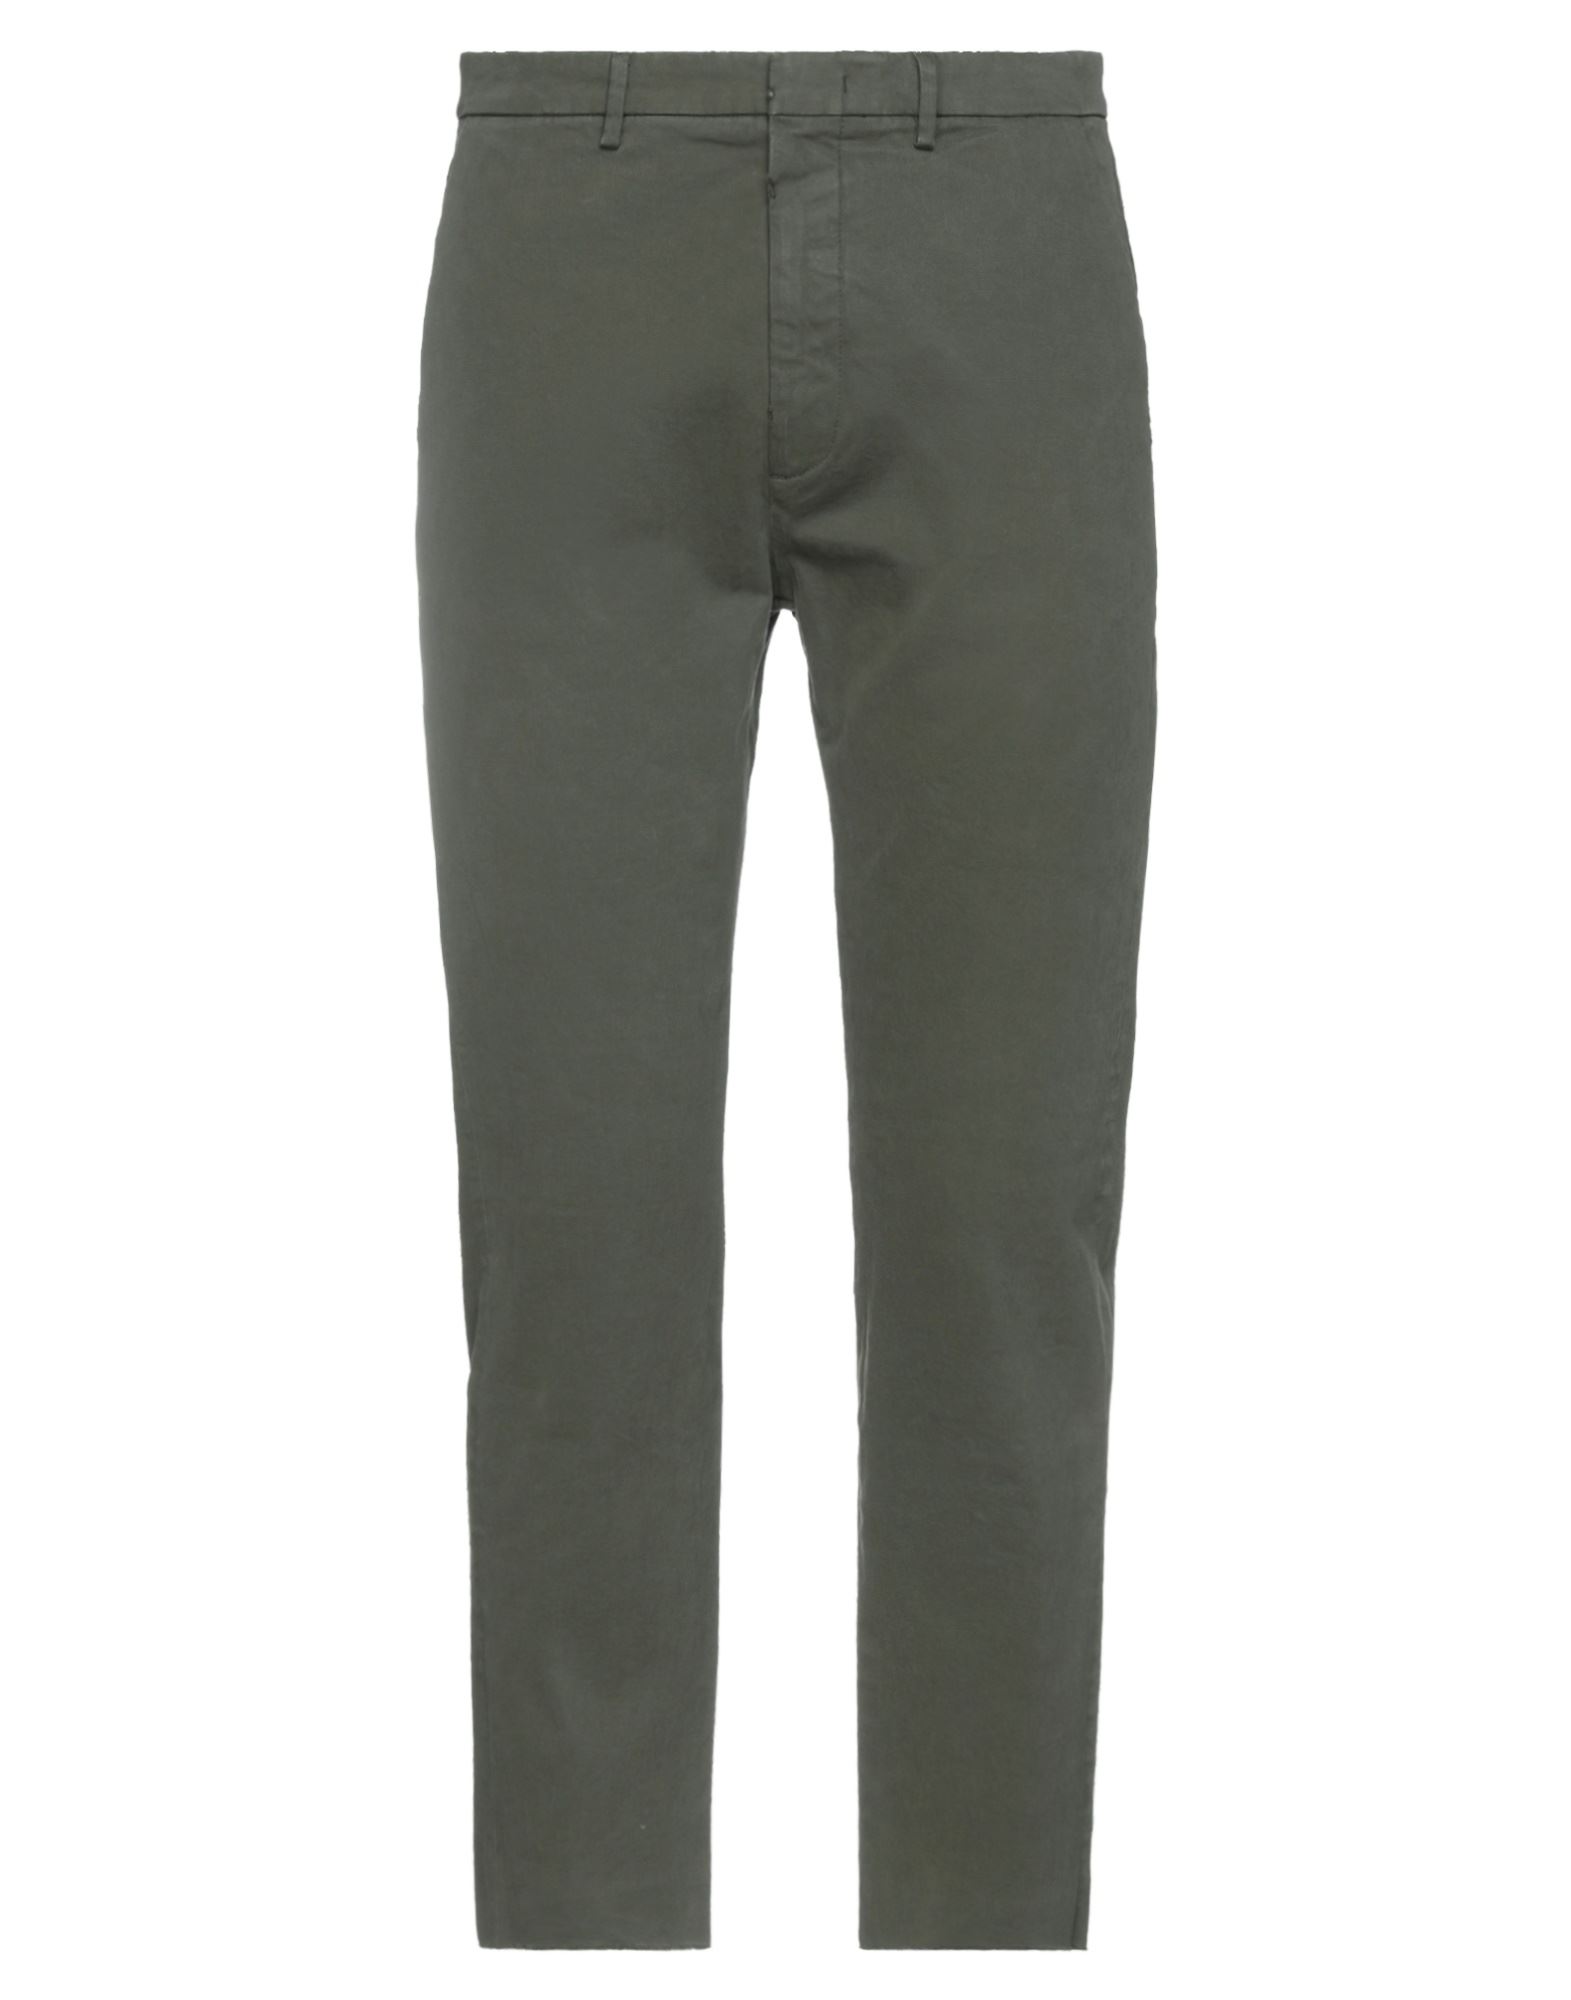 Pence Pants In Military Green